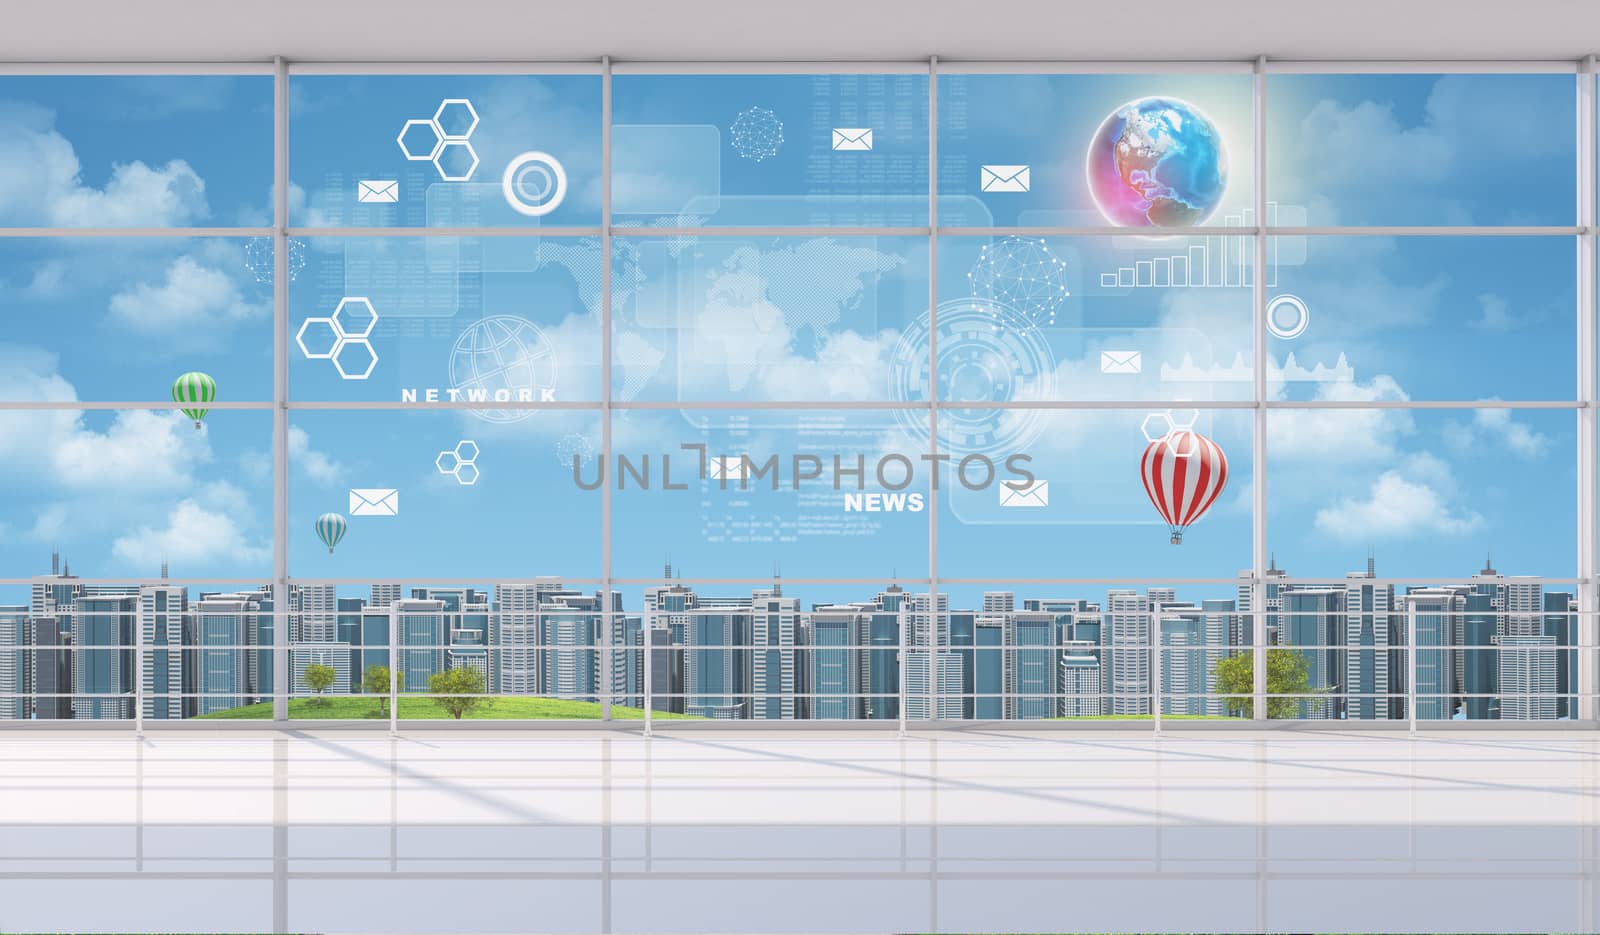 Cityscape outside window, fine weather with balloons, indoor view. Elements of this image furnished by NASA